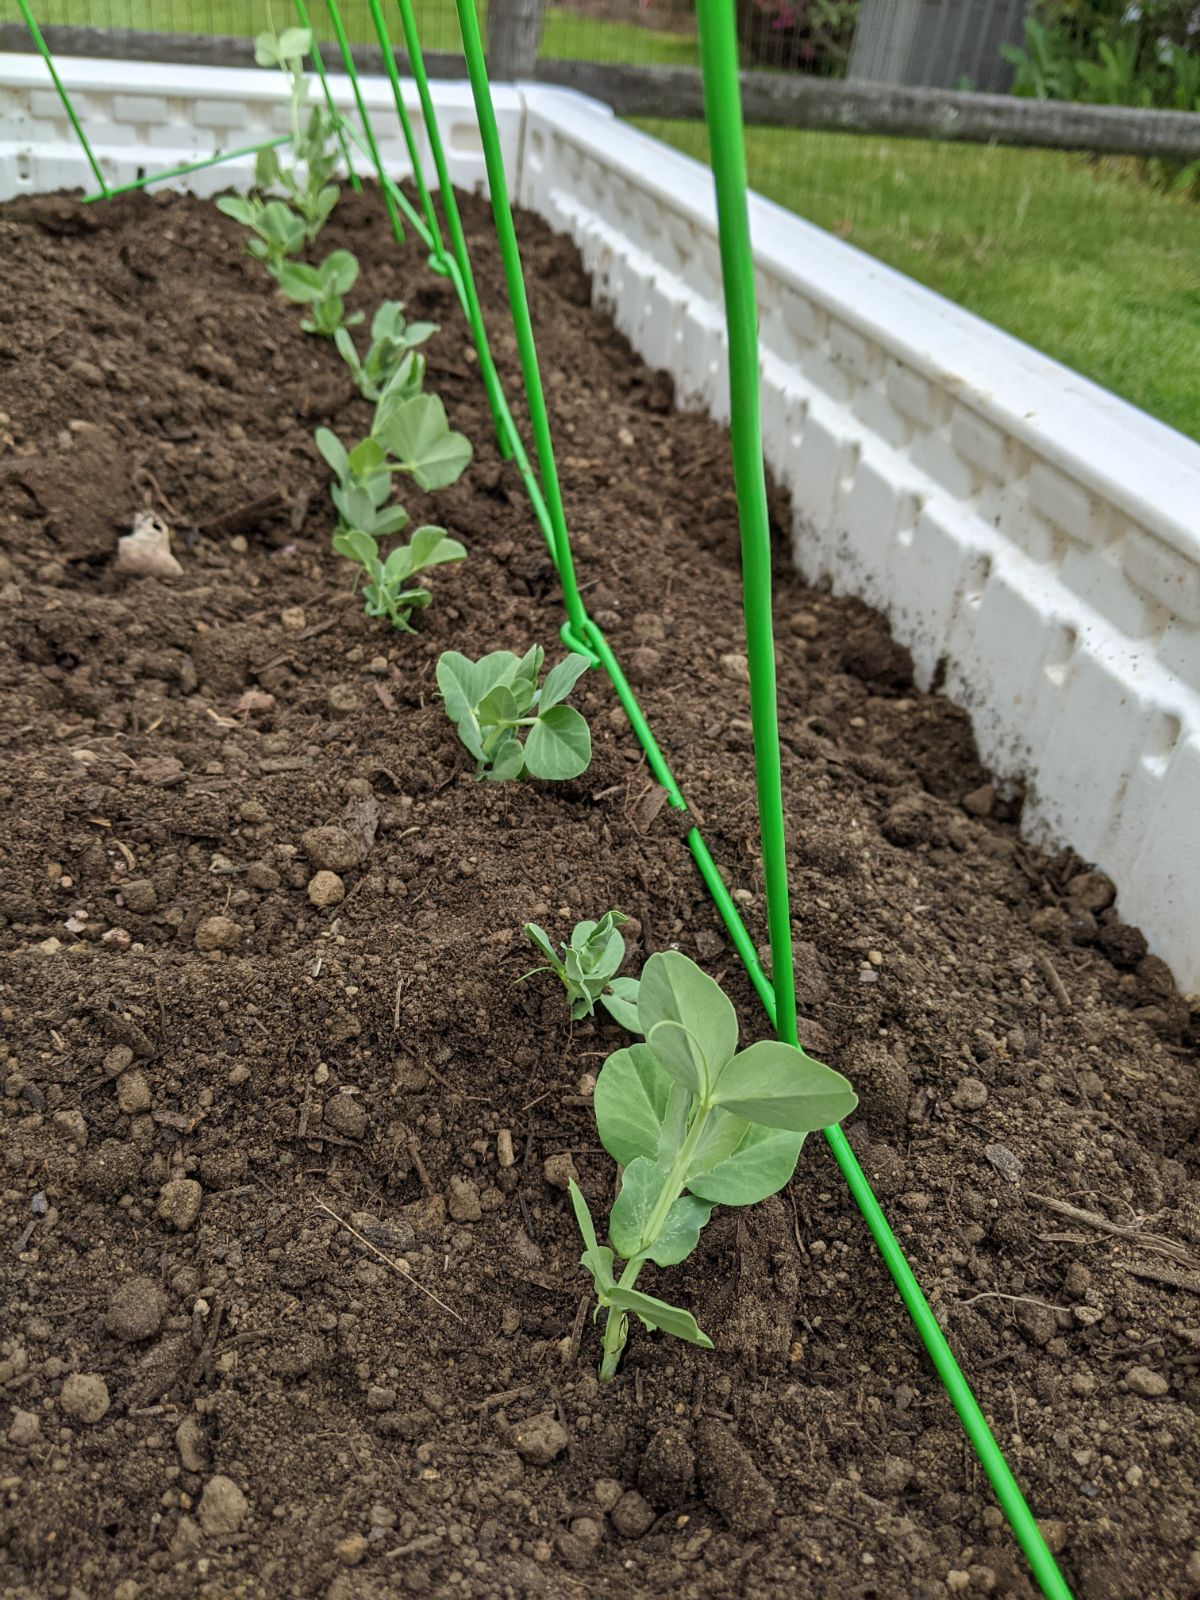 Young snow pea plants growing along a trellis in a raised bed